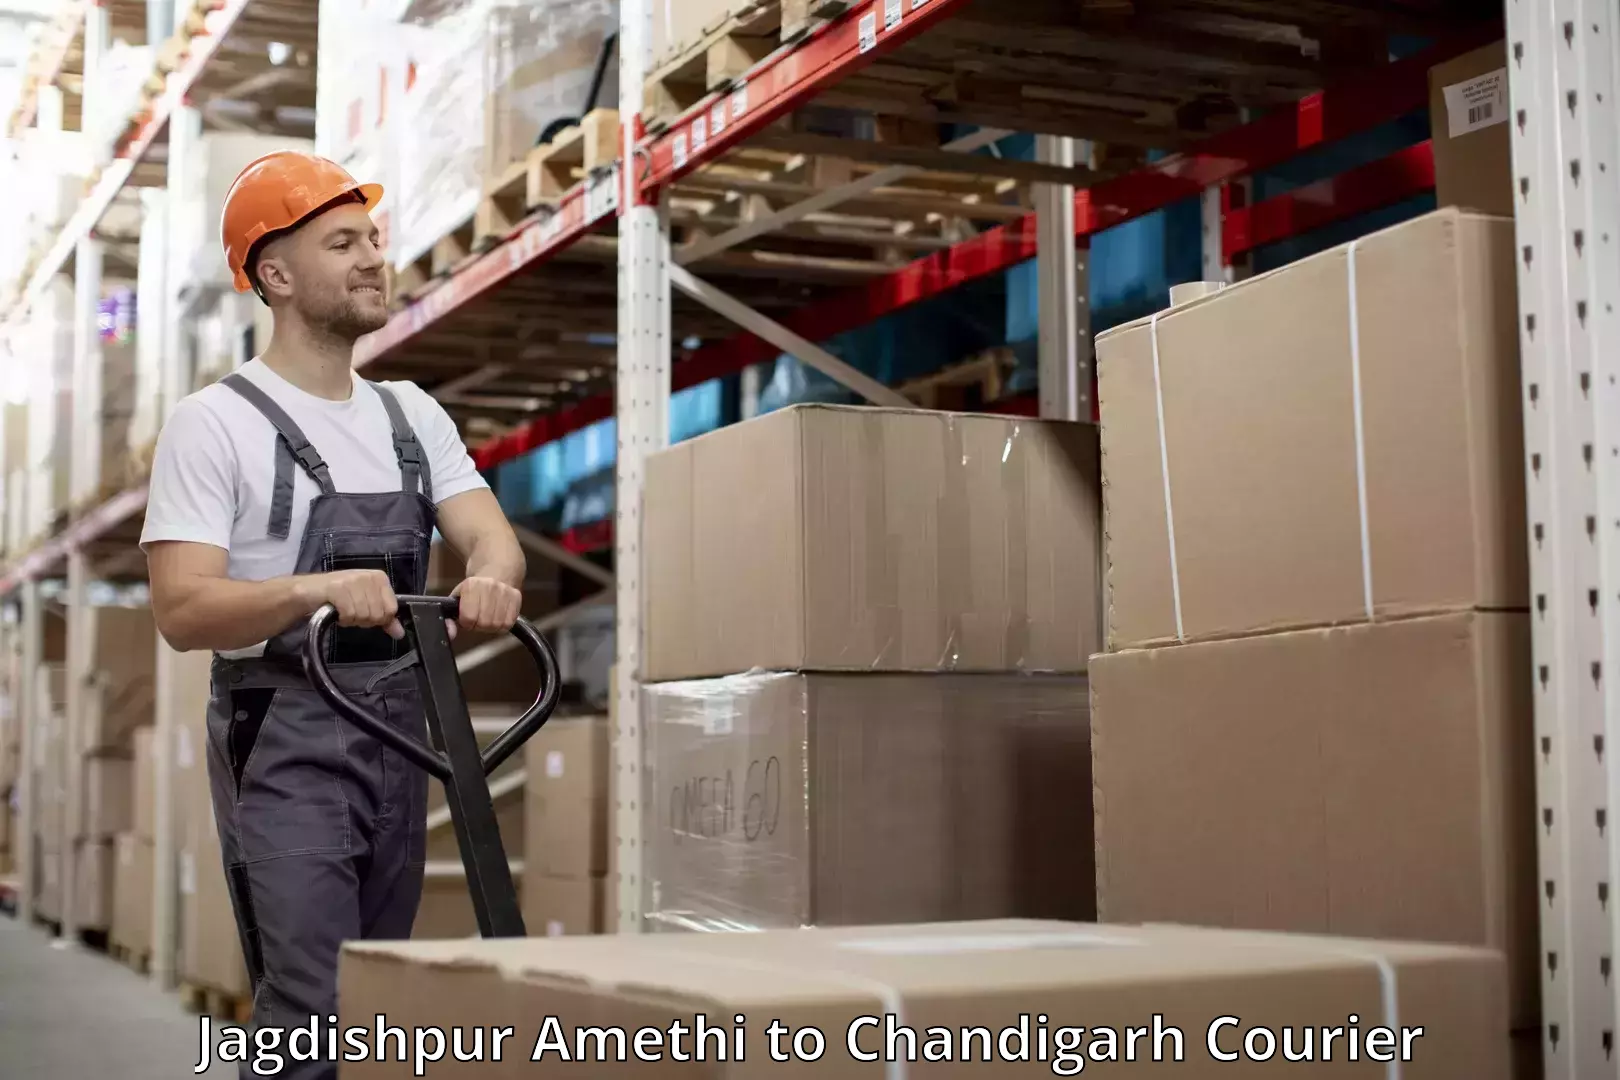 Baggage delivery technology Jagdishpur Amethi to Chandigarh